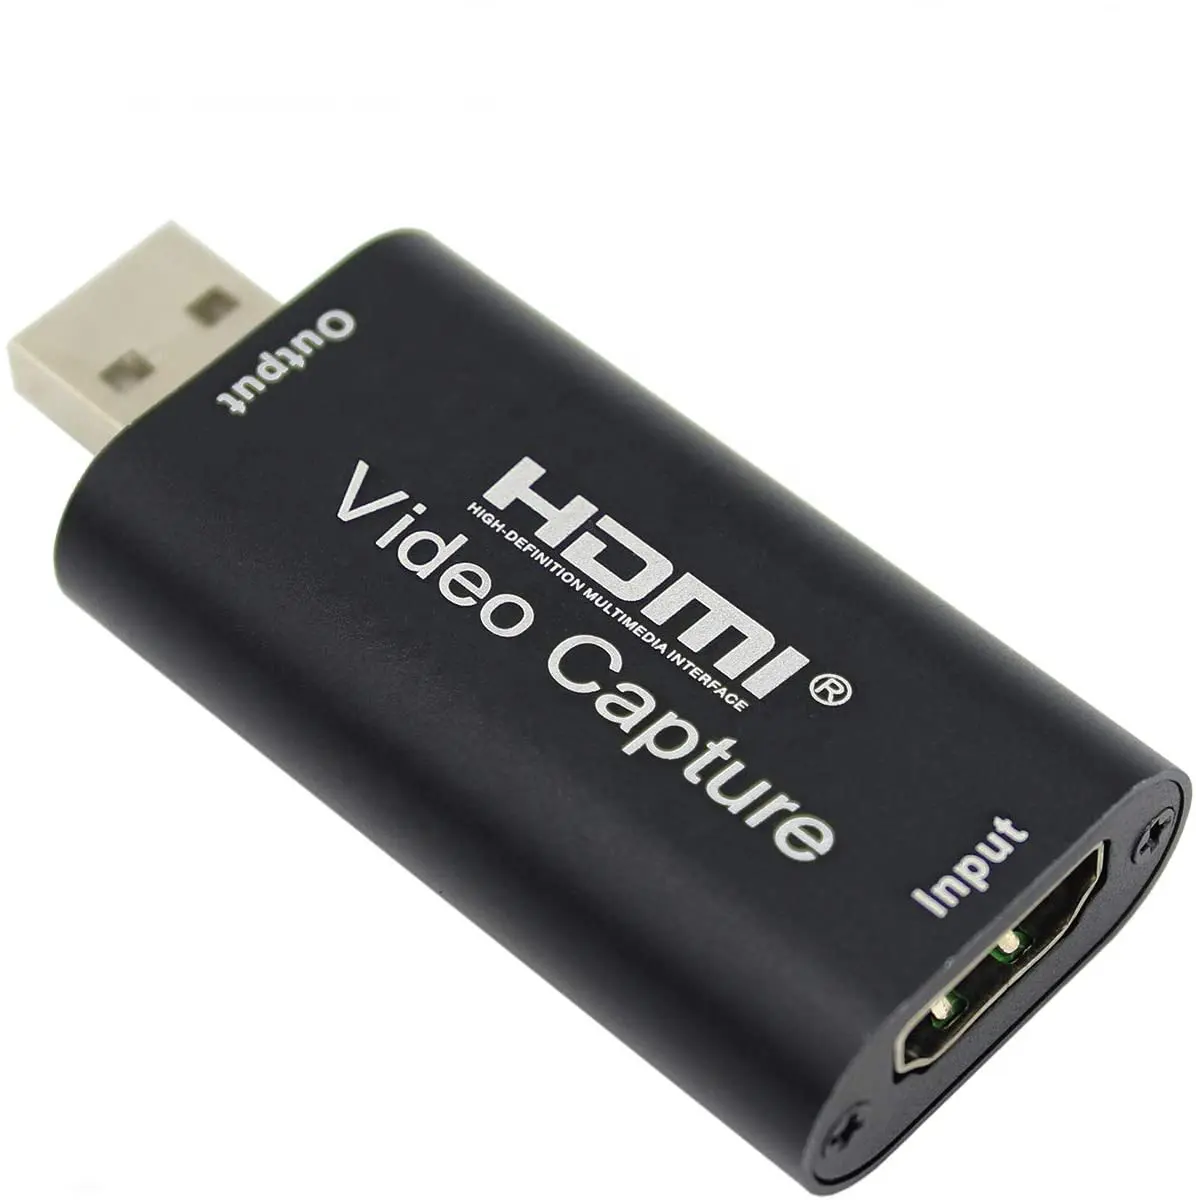 Mini HD 1080P HDTV To USB 2.0 Video Capture Card Game Recording Box for Computer Youtube OBS Etc. Live Streaming